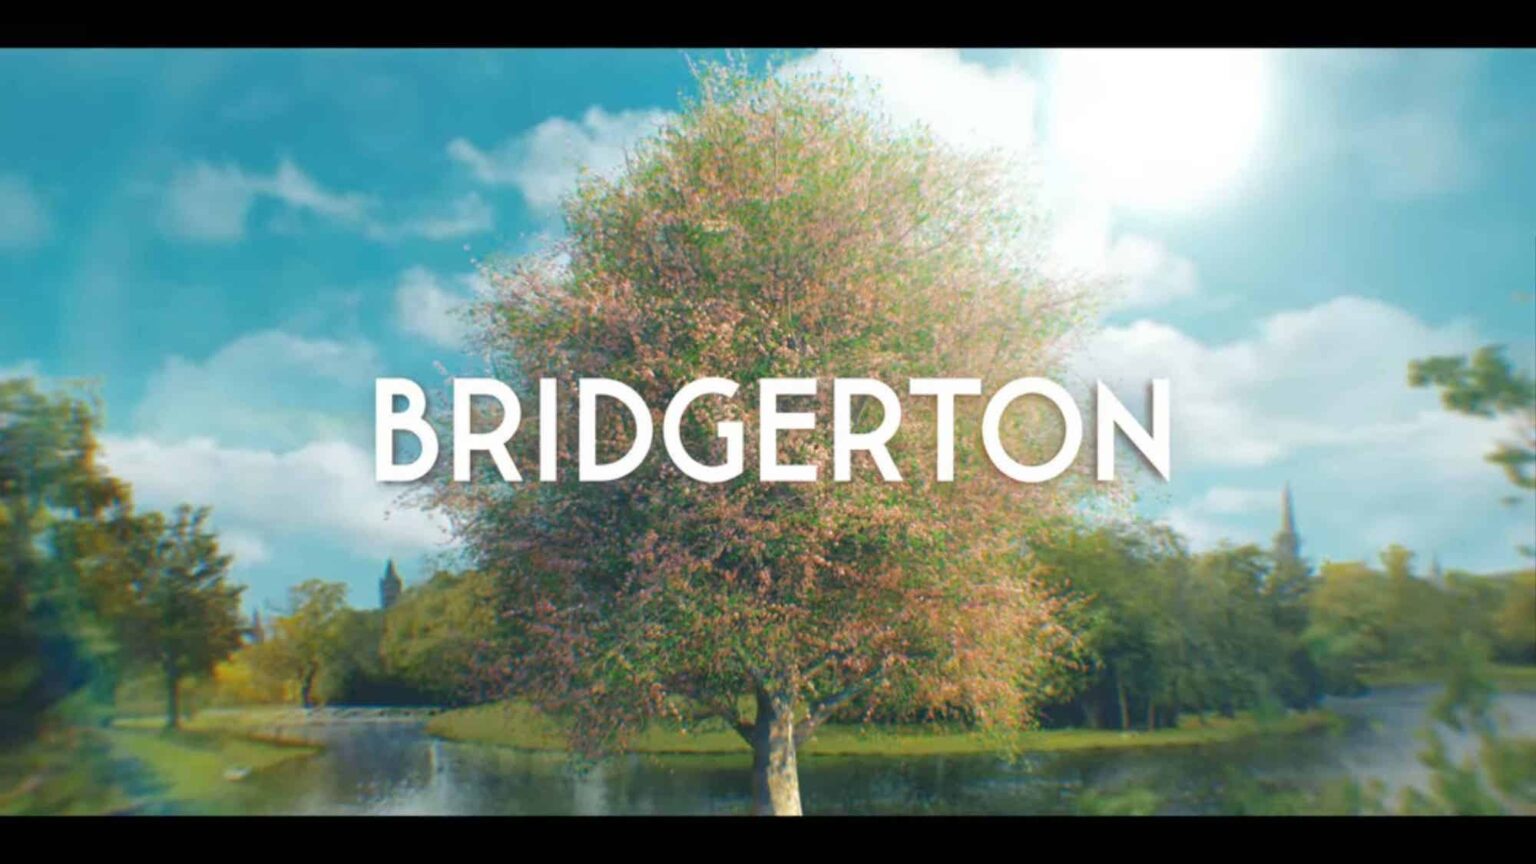 Curious about the future of the 'Bridgerton' series? Learn about the plot of the books to see where the show is heading in later seasons.